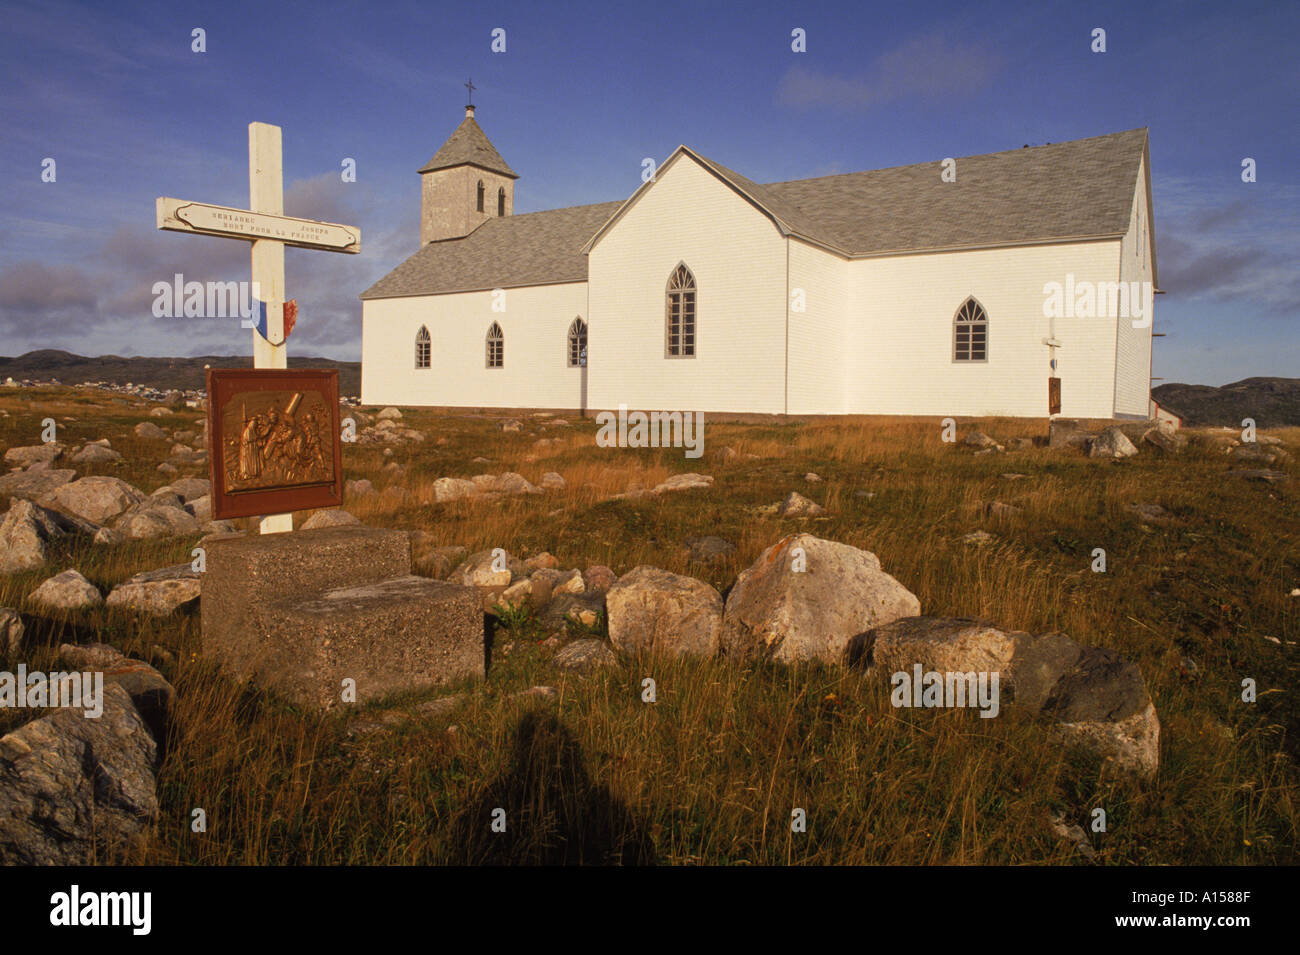 Station of the Cross and church at St Pierre et Miquelon on the Isle aux Marins an island near Newfoundland Canada K Gillham Stock Photo